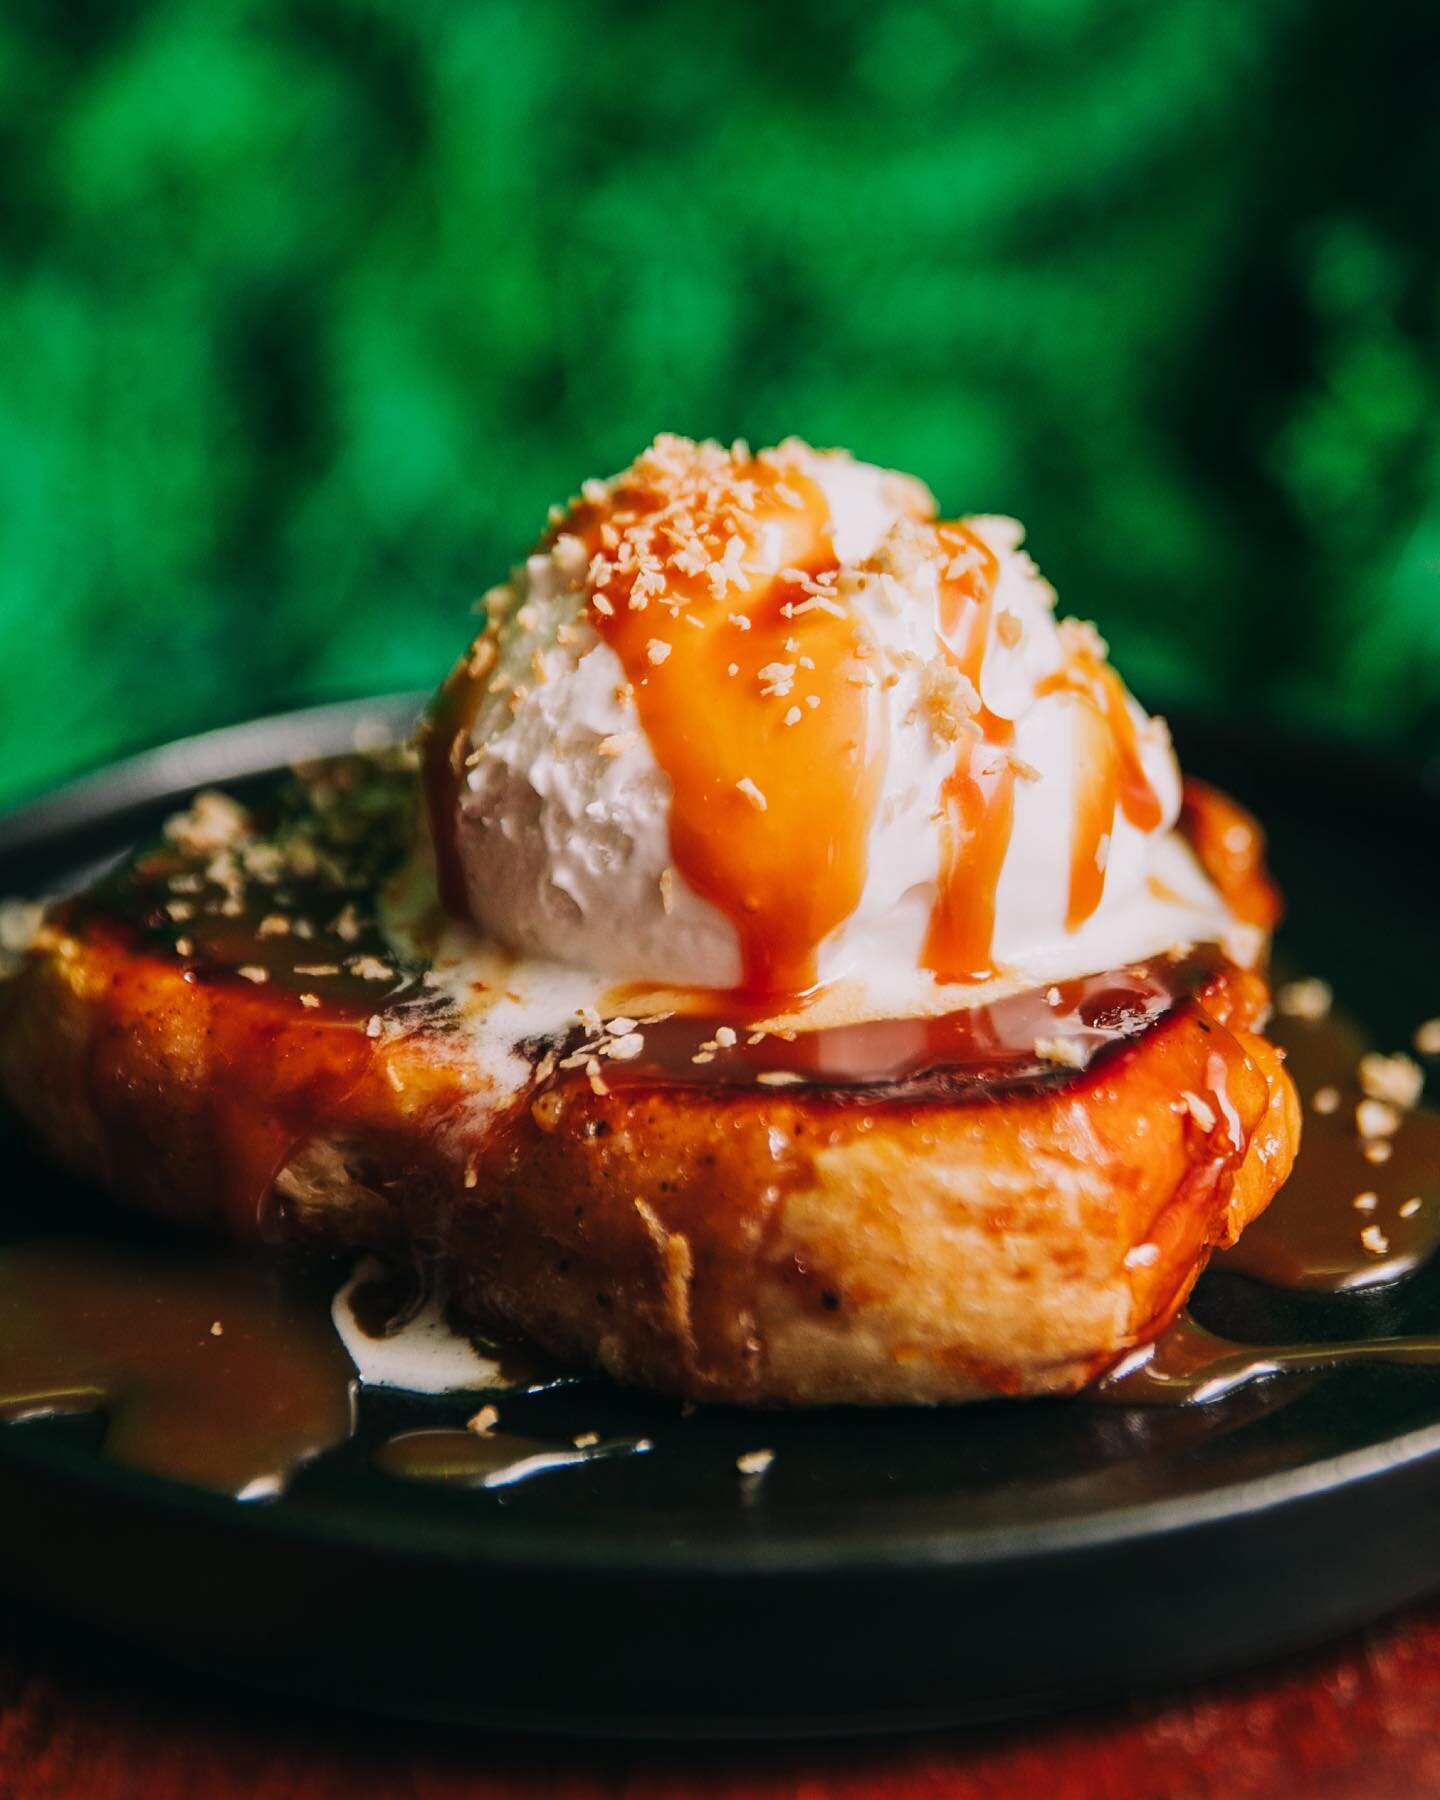 (Ph)uket it&rsquo;s the weekend 🎉

If you're looking for a tasty treat to kick off your weekend, try our newest special: (Ph)uket Toast! 

Crunchy burnt butter brioche slice, topped with coconut ice cream and finished with gooey caramel sauce. 

And